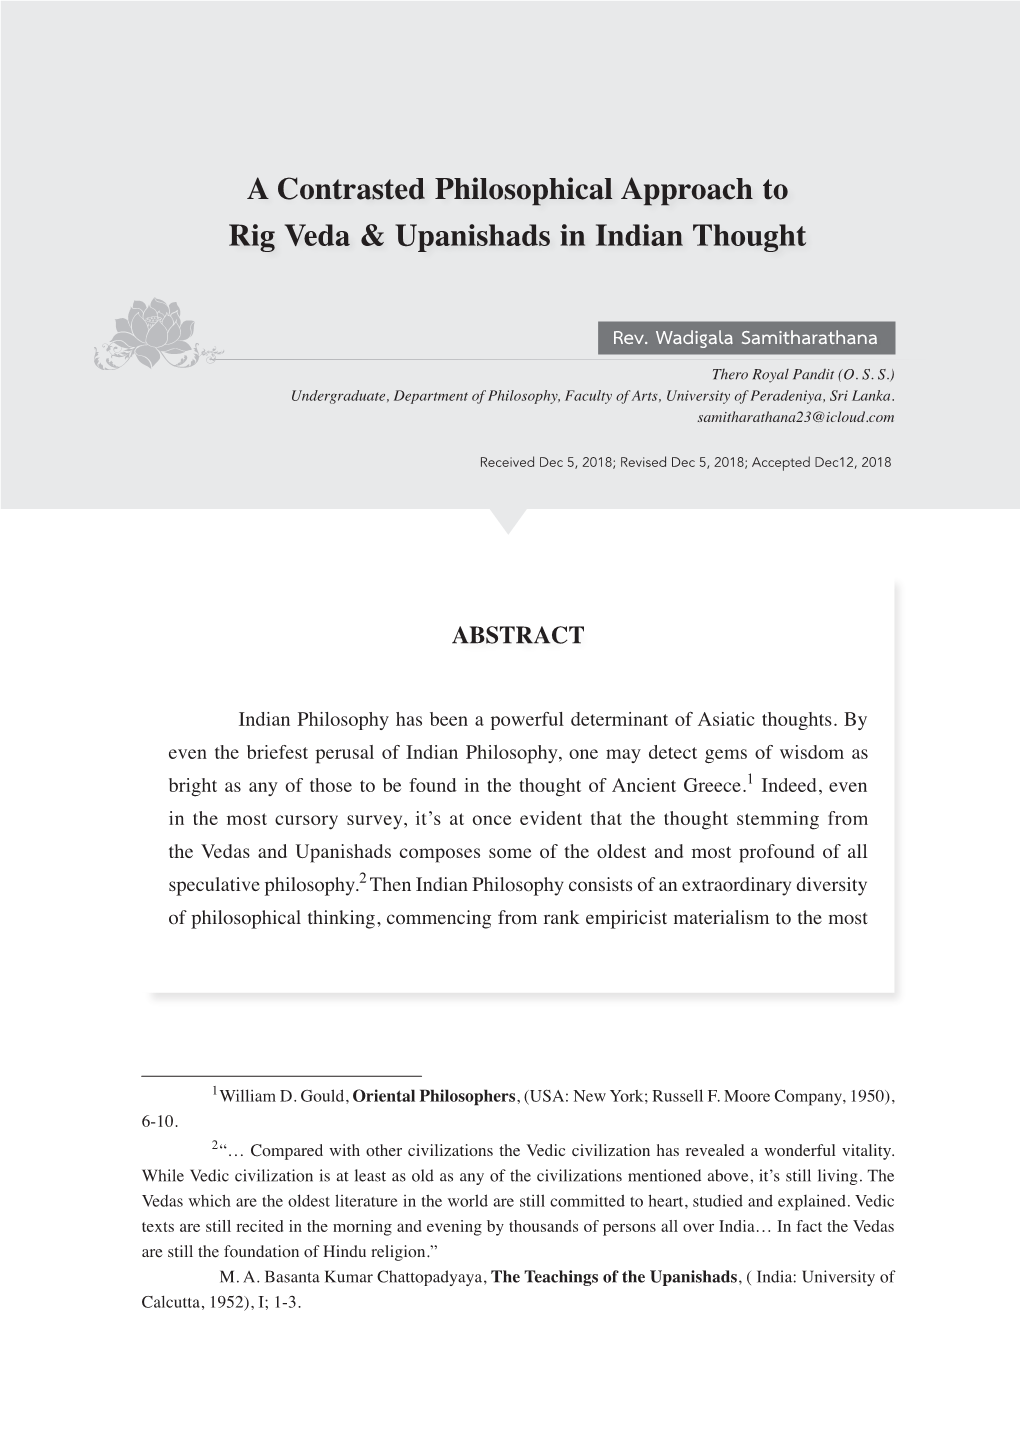 A Contrasted Philosophical Approach to Rig Veda & Upanishads in Indian